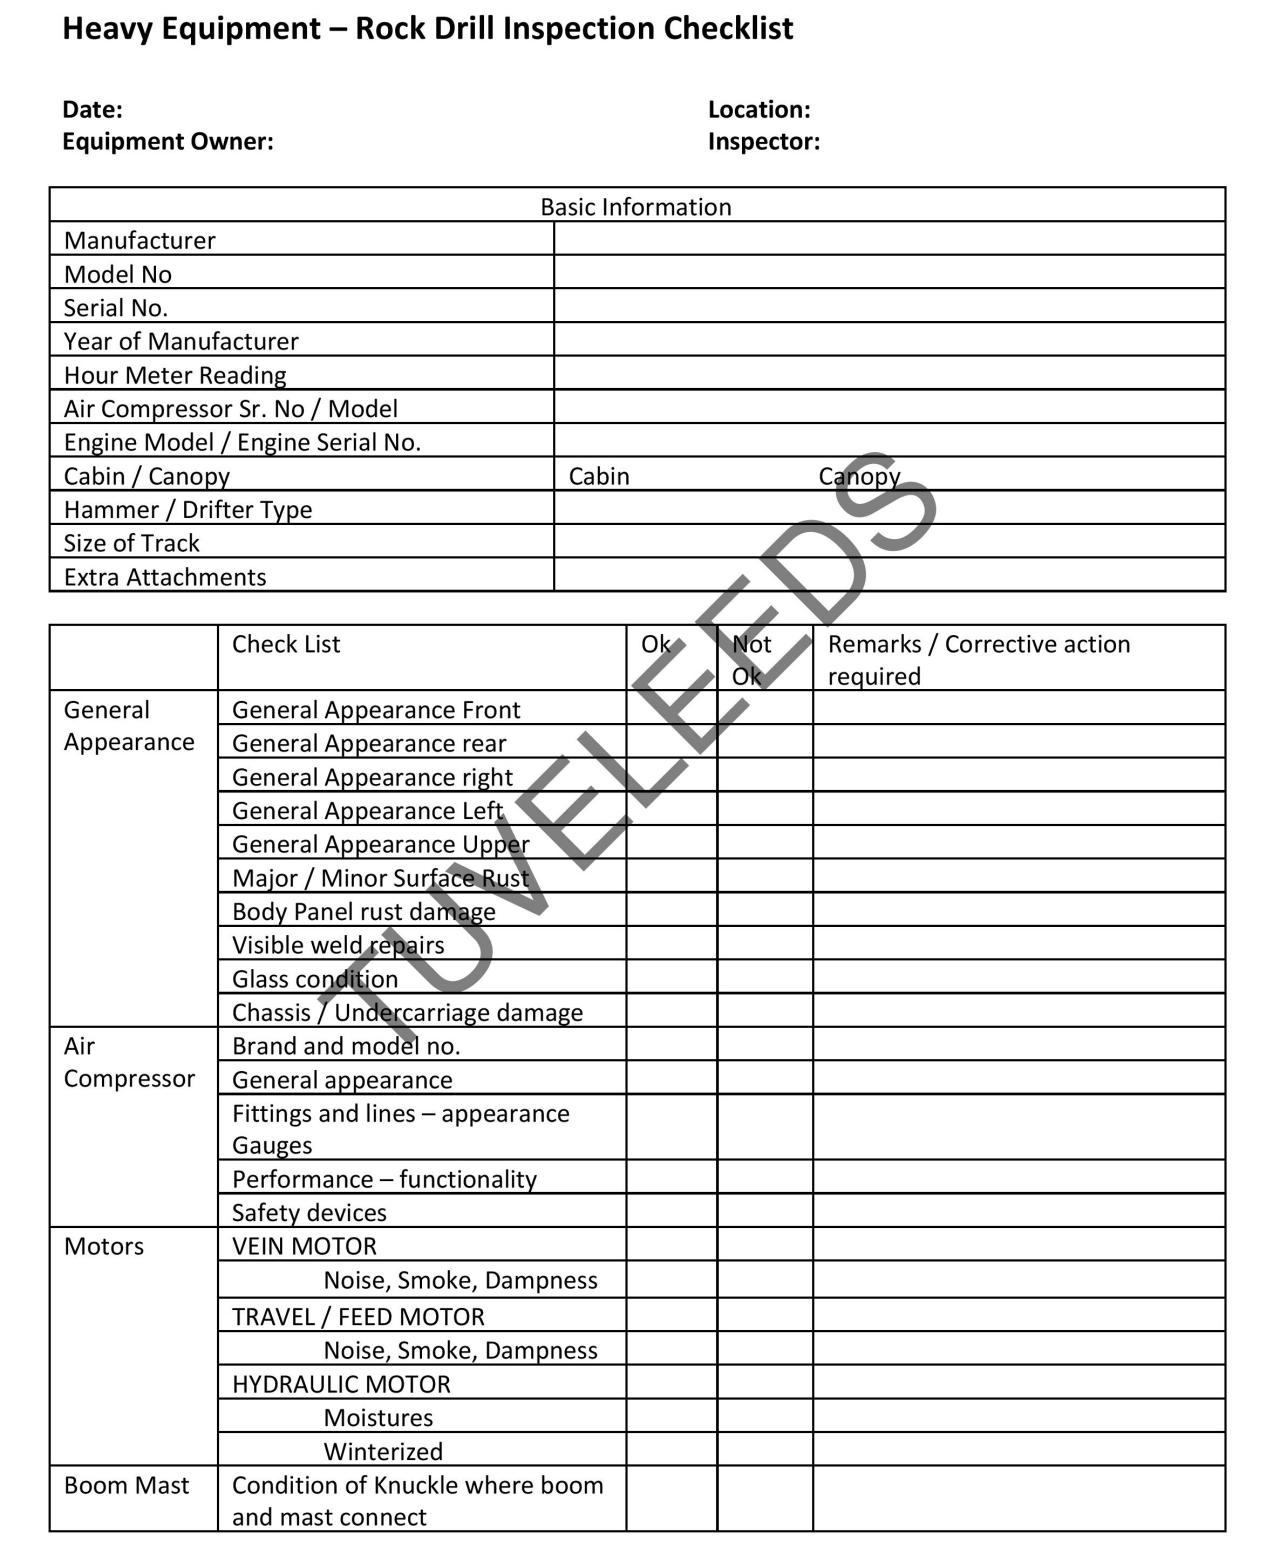 Product Rock Drill Inspection Checklist - Tove Leeds image